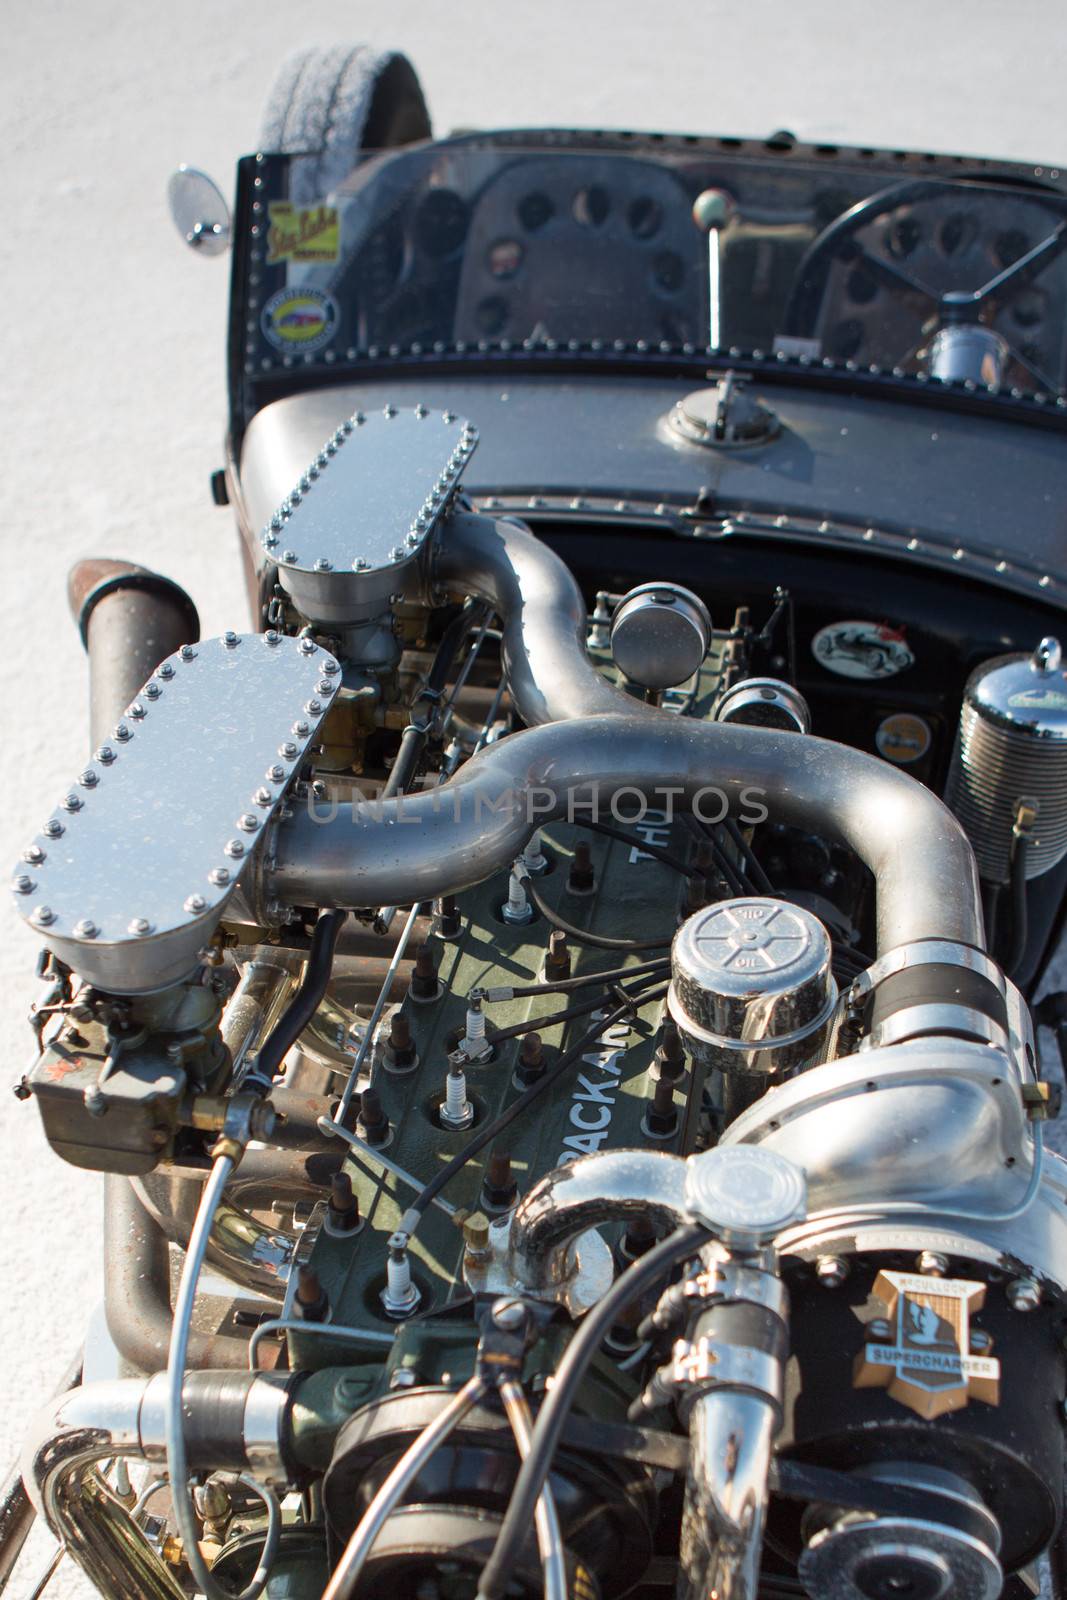 Vintage Packard car engine during the World of Speed 2012. by watchtheworld